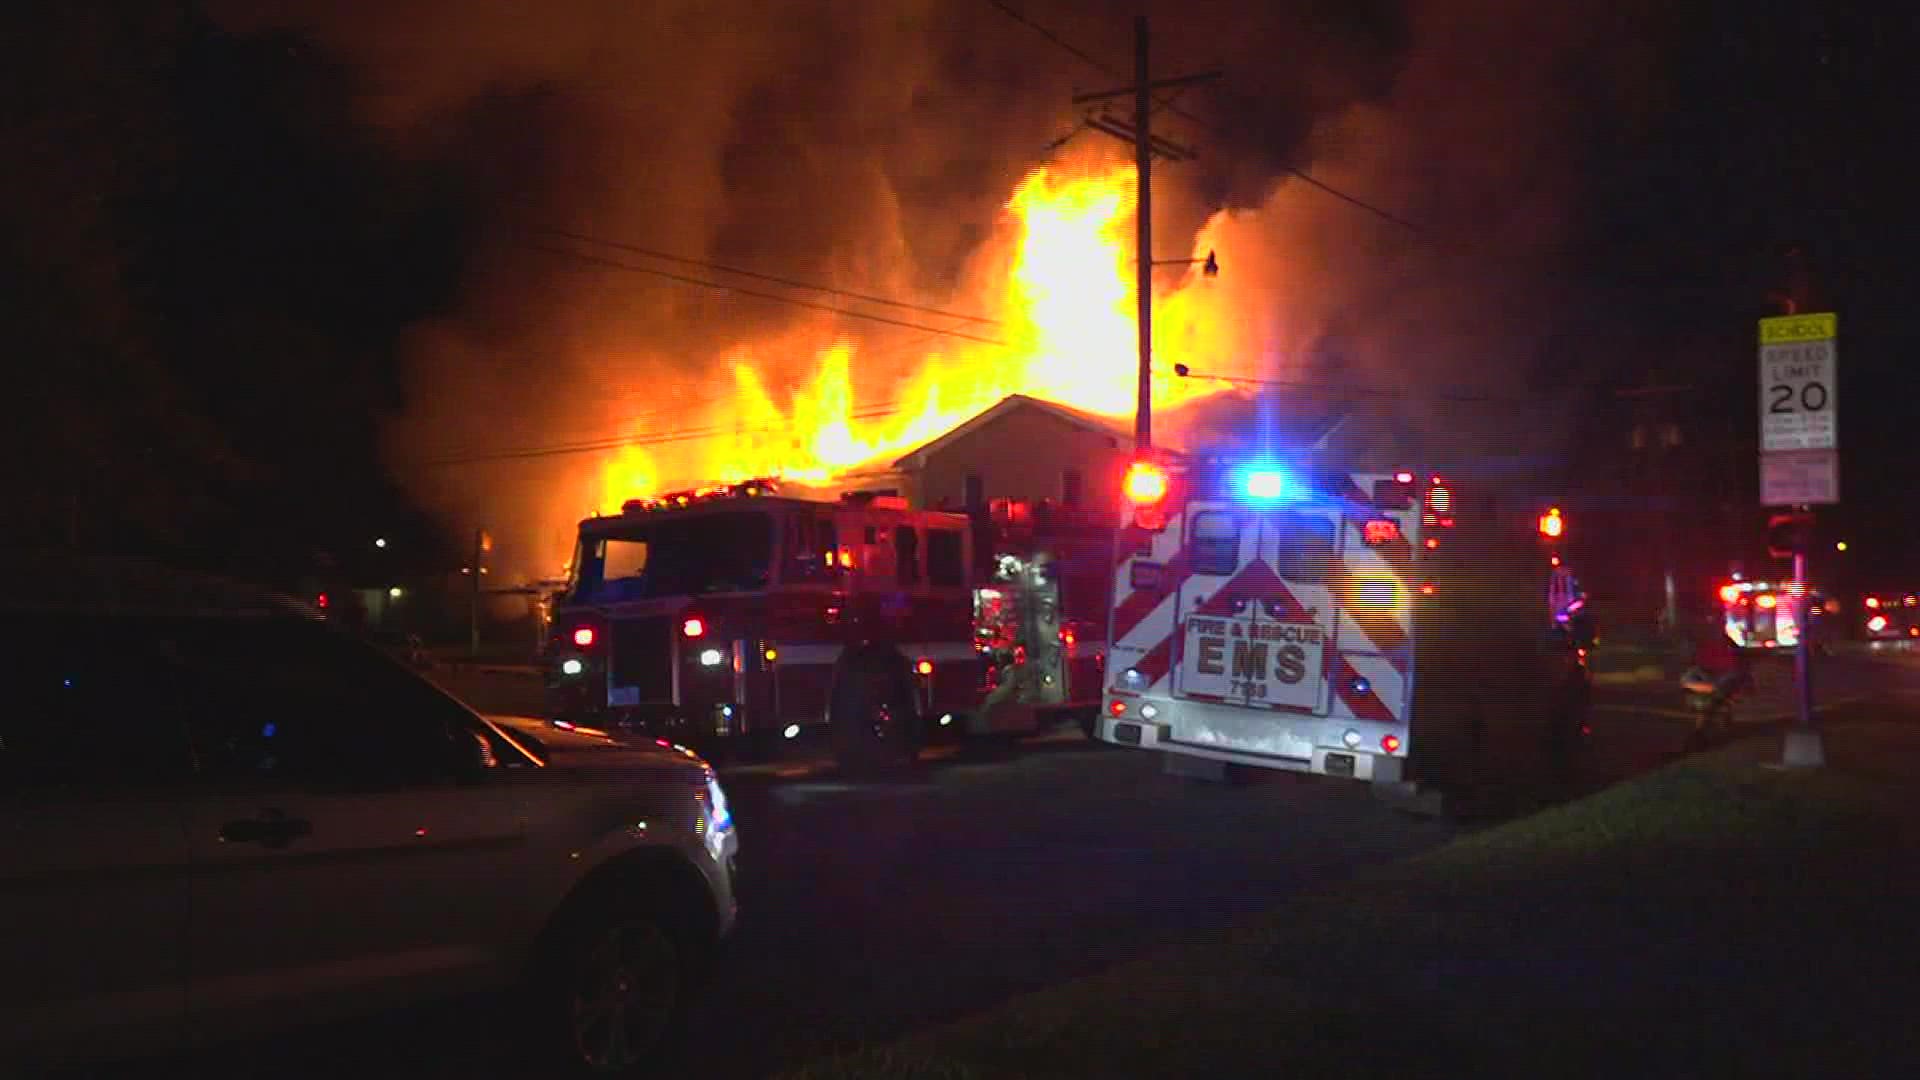 Decades of history were destroyed after flames engulfed the Central City Baptist Church in Beaumont overnight.